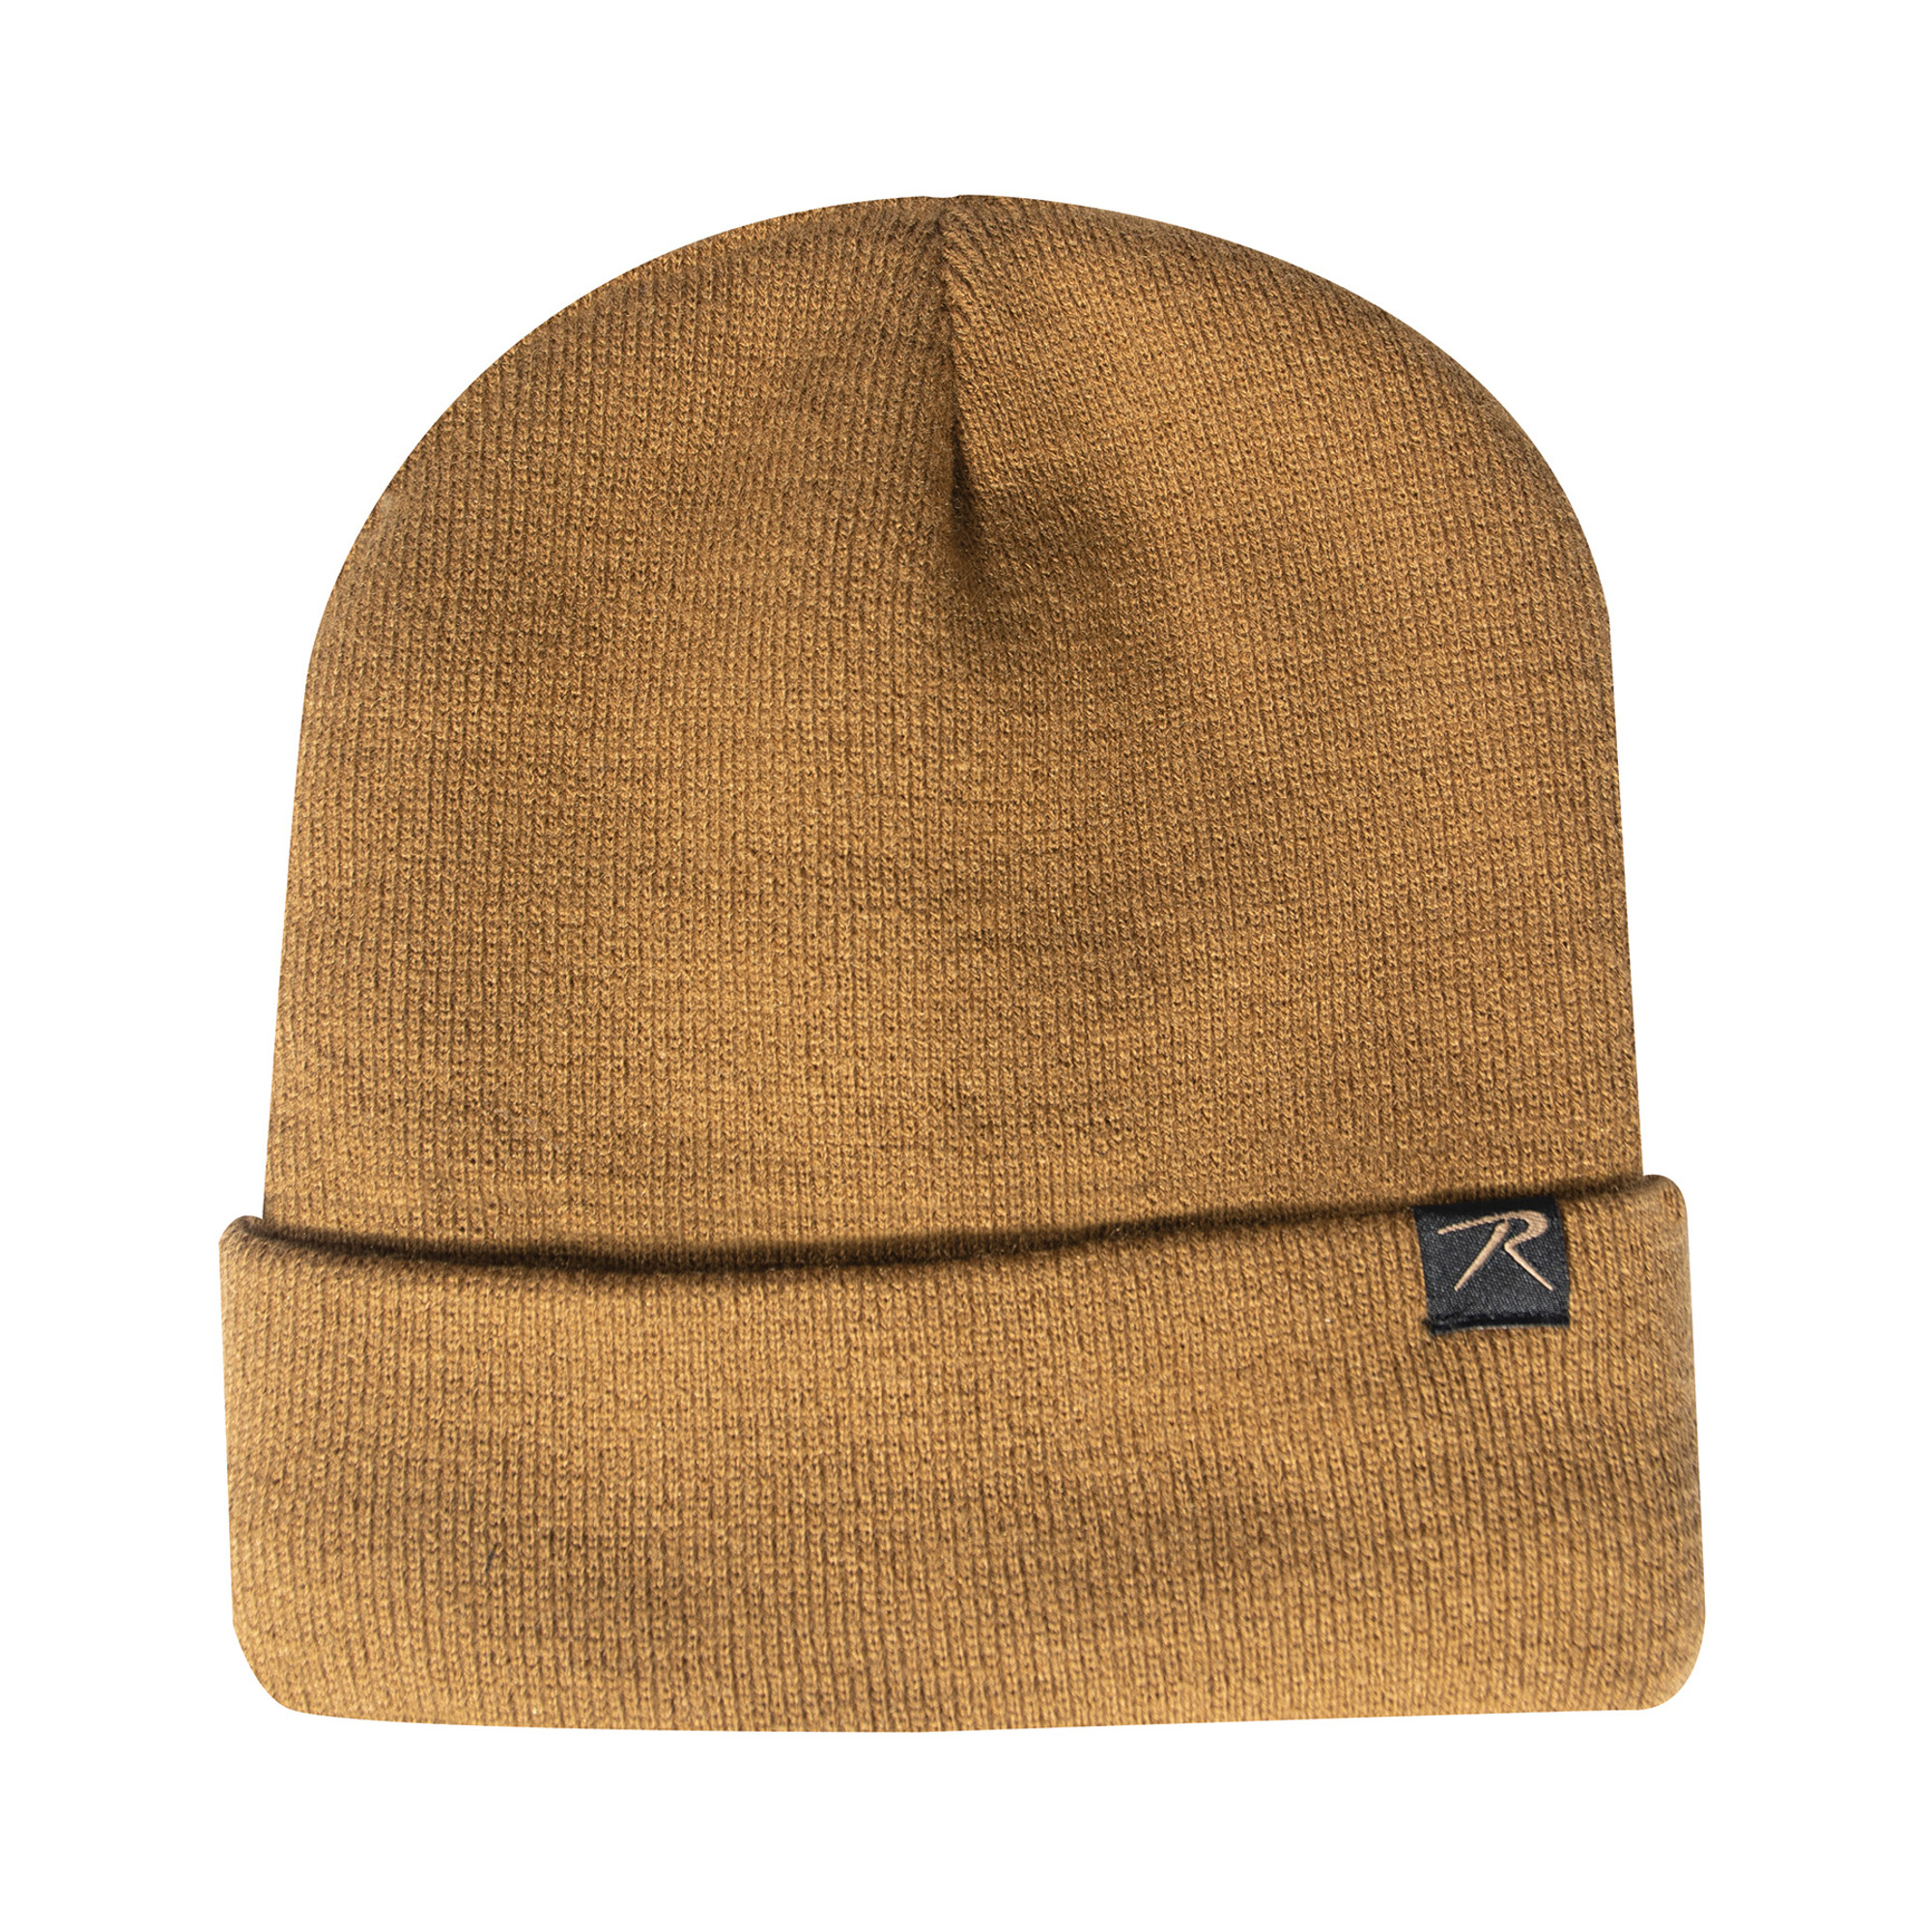 Deluxe Fine Knit Sherpa-Lined Watch Cap - Coyote Brown